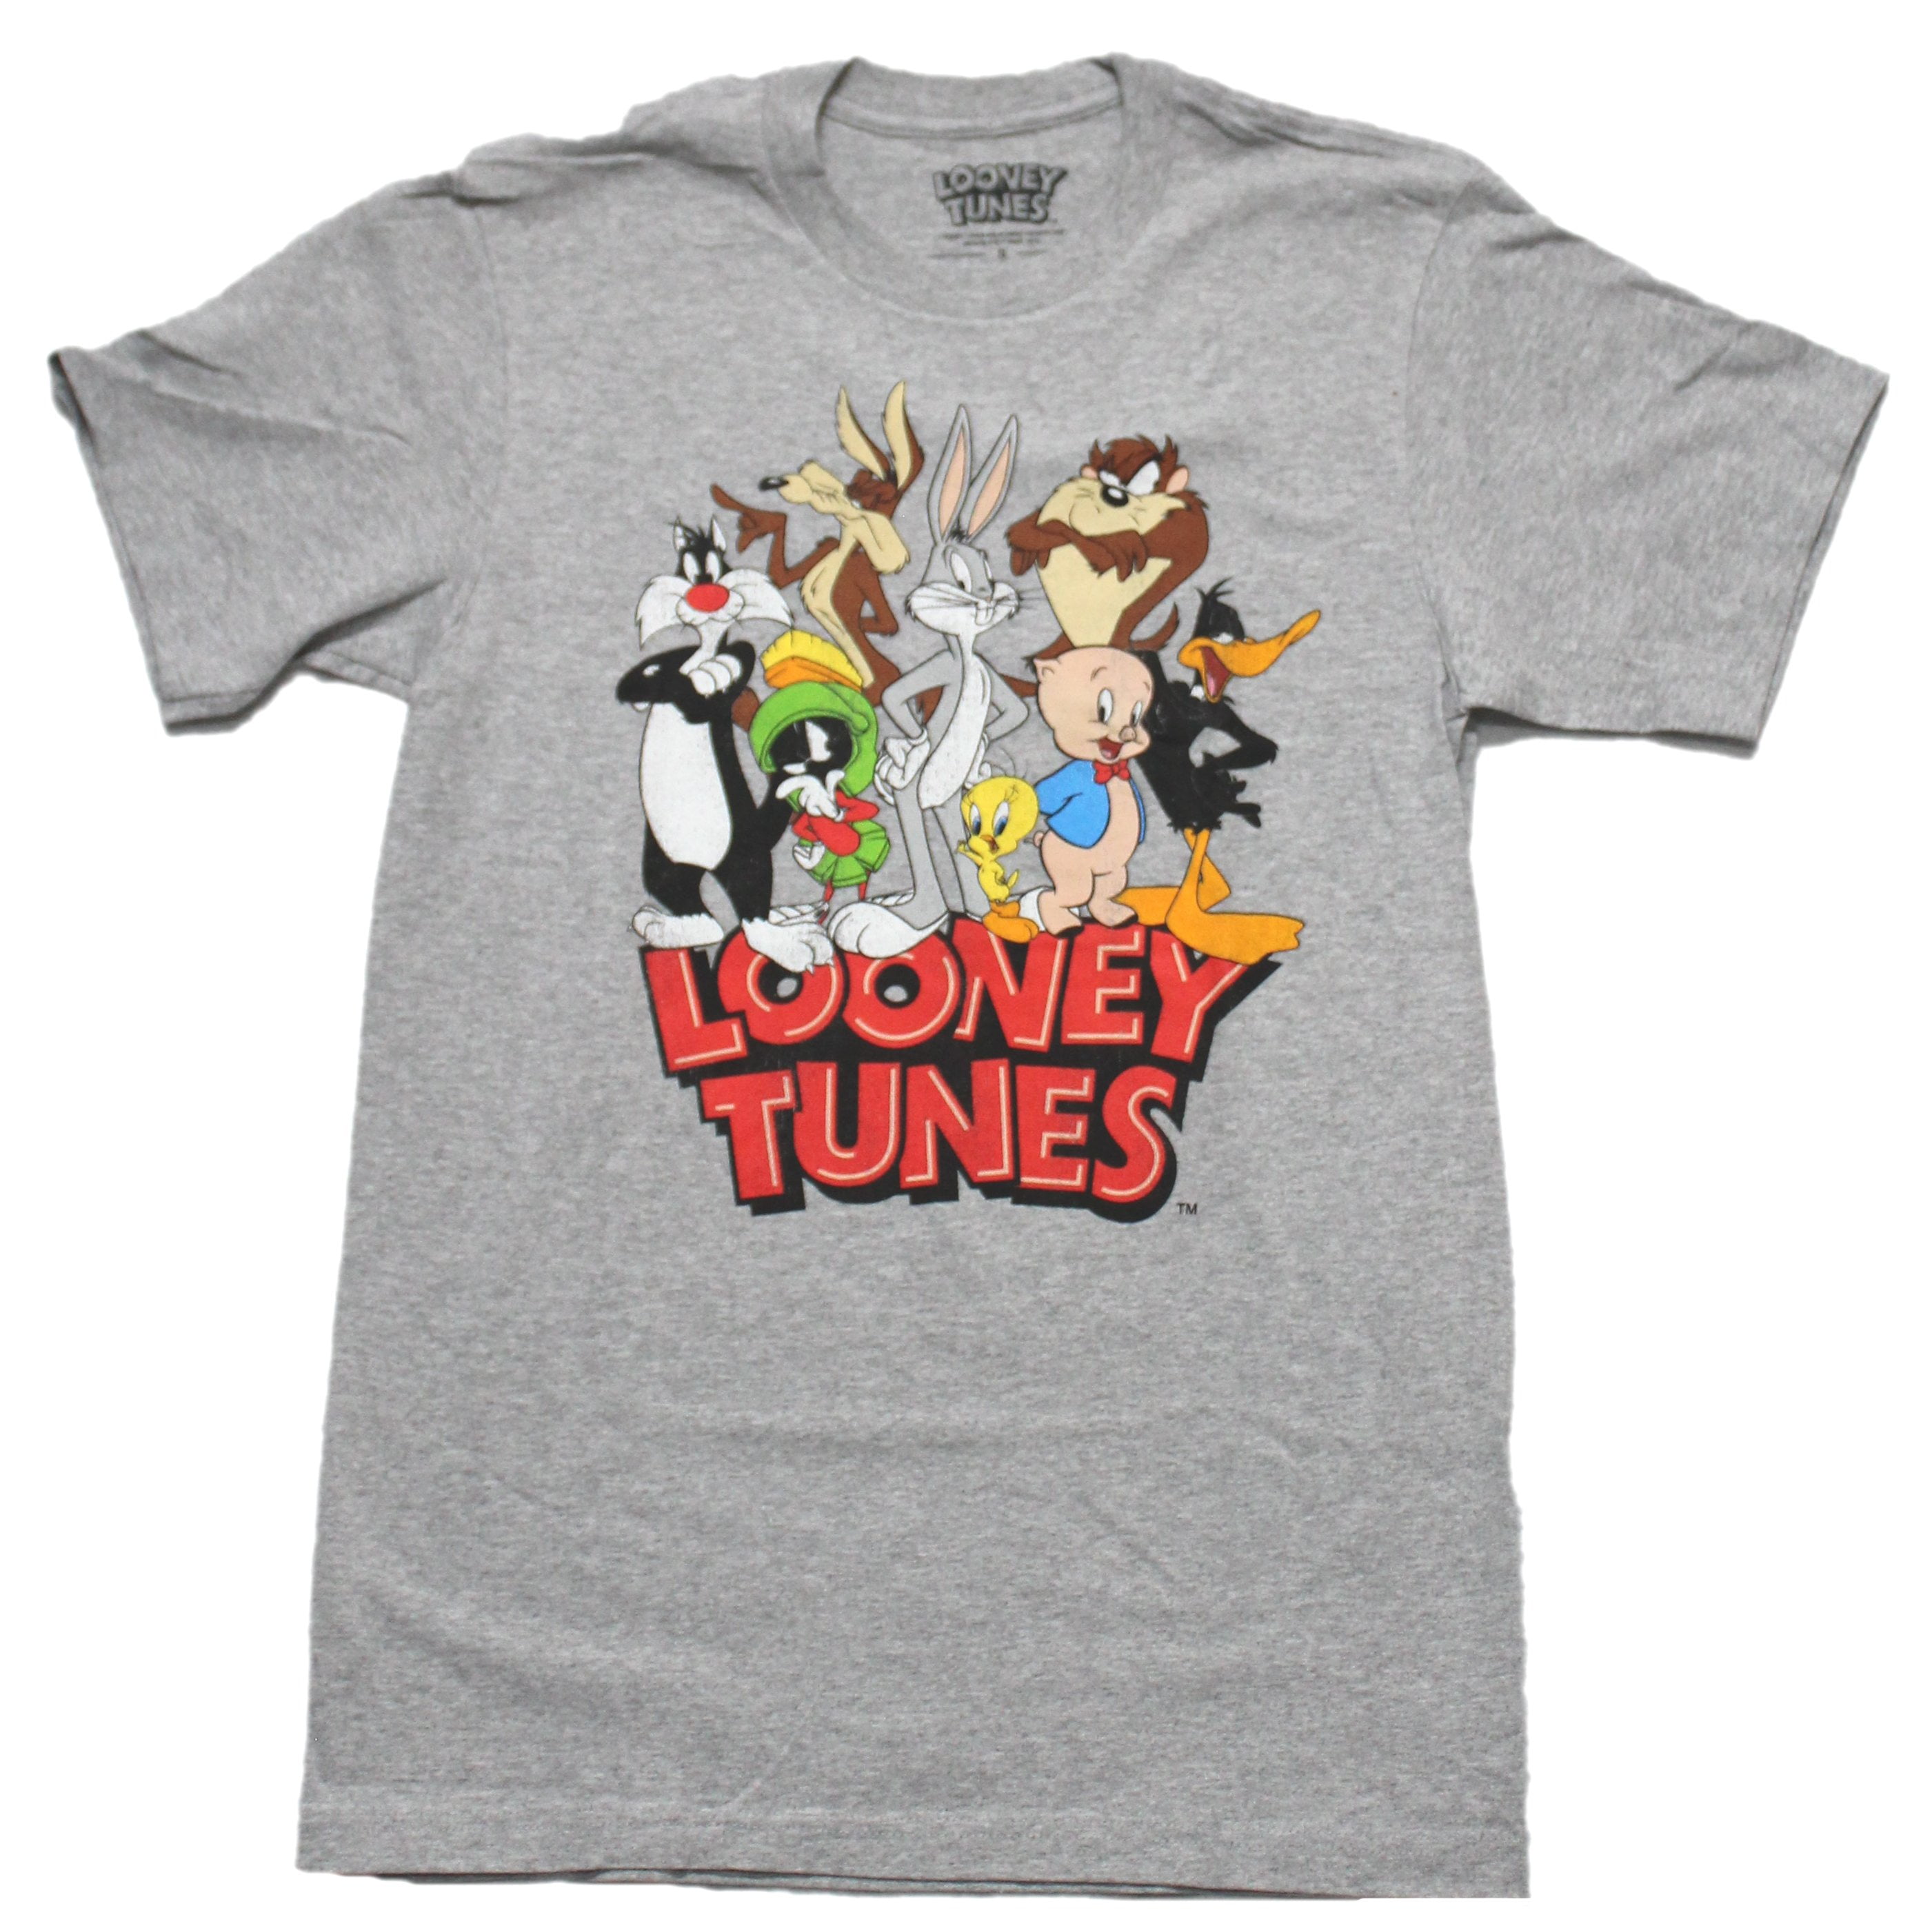 Looney Tunes Mens T-Shirt - Bugs Taz and More Over Logo Image (Medium)